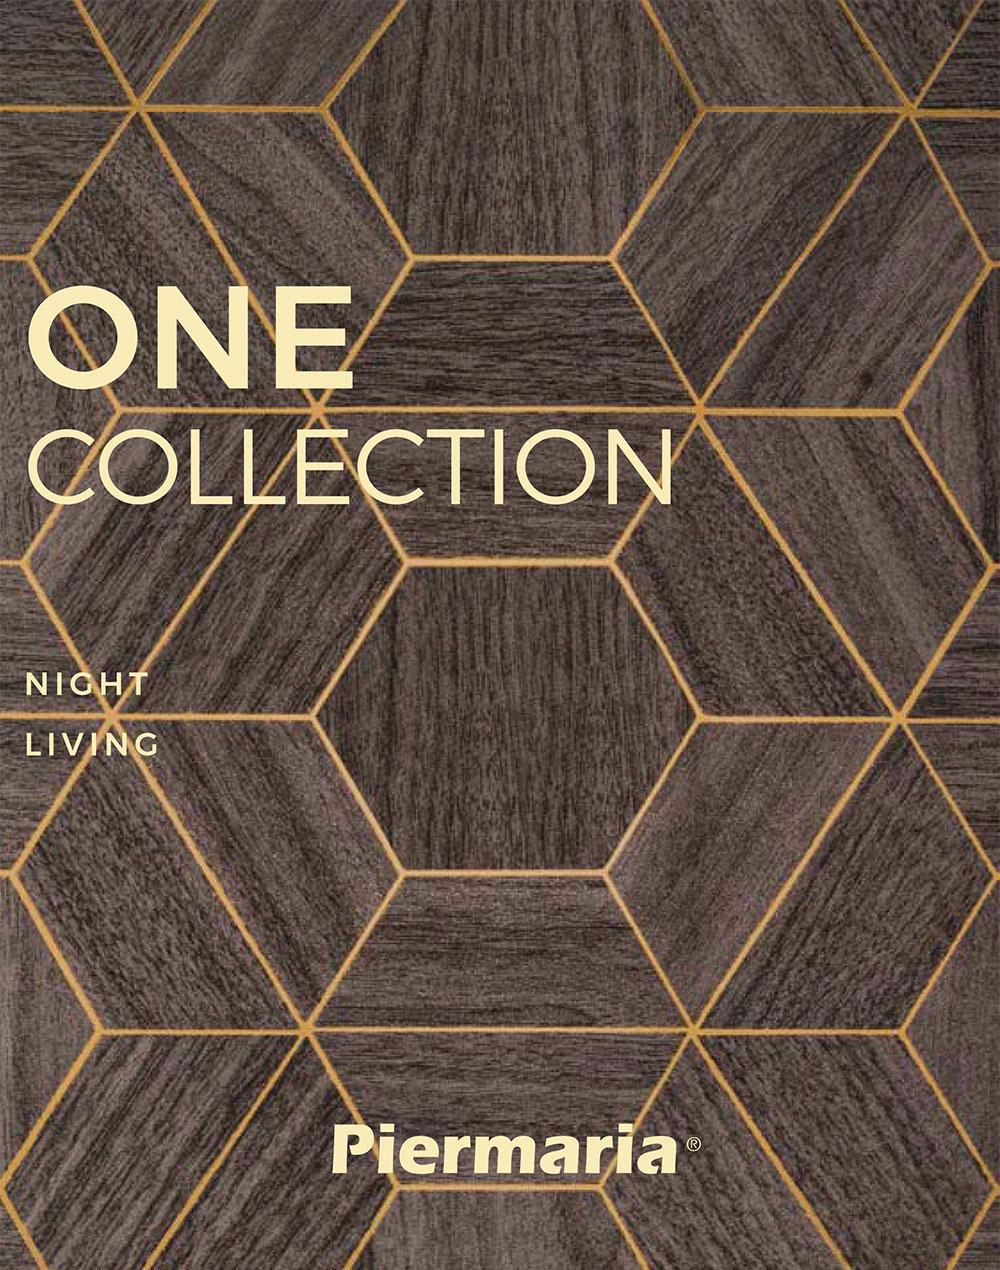 PIERMARIA - One collection